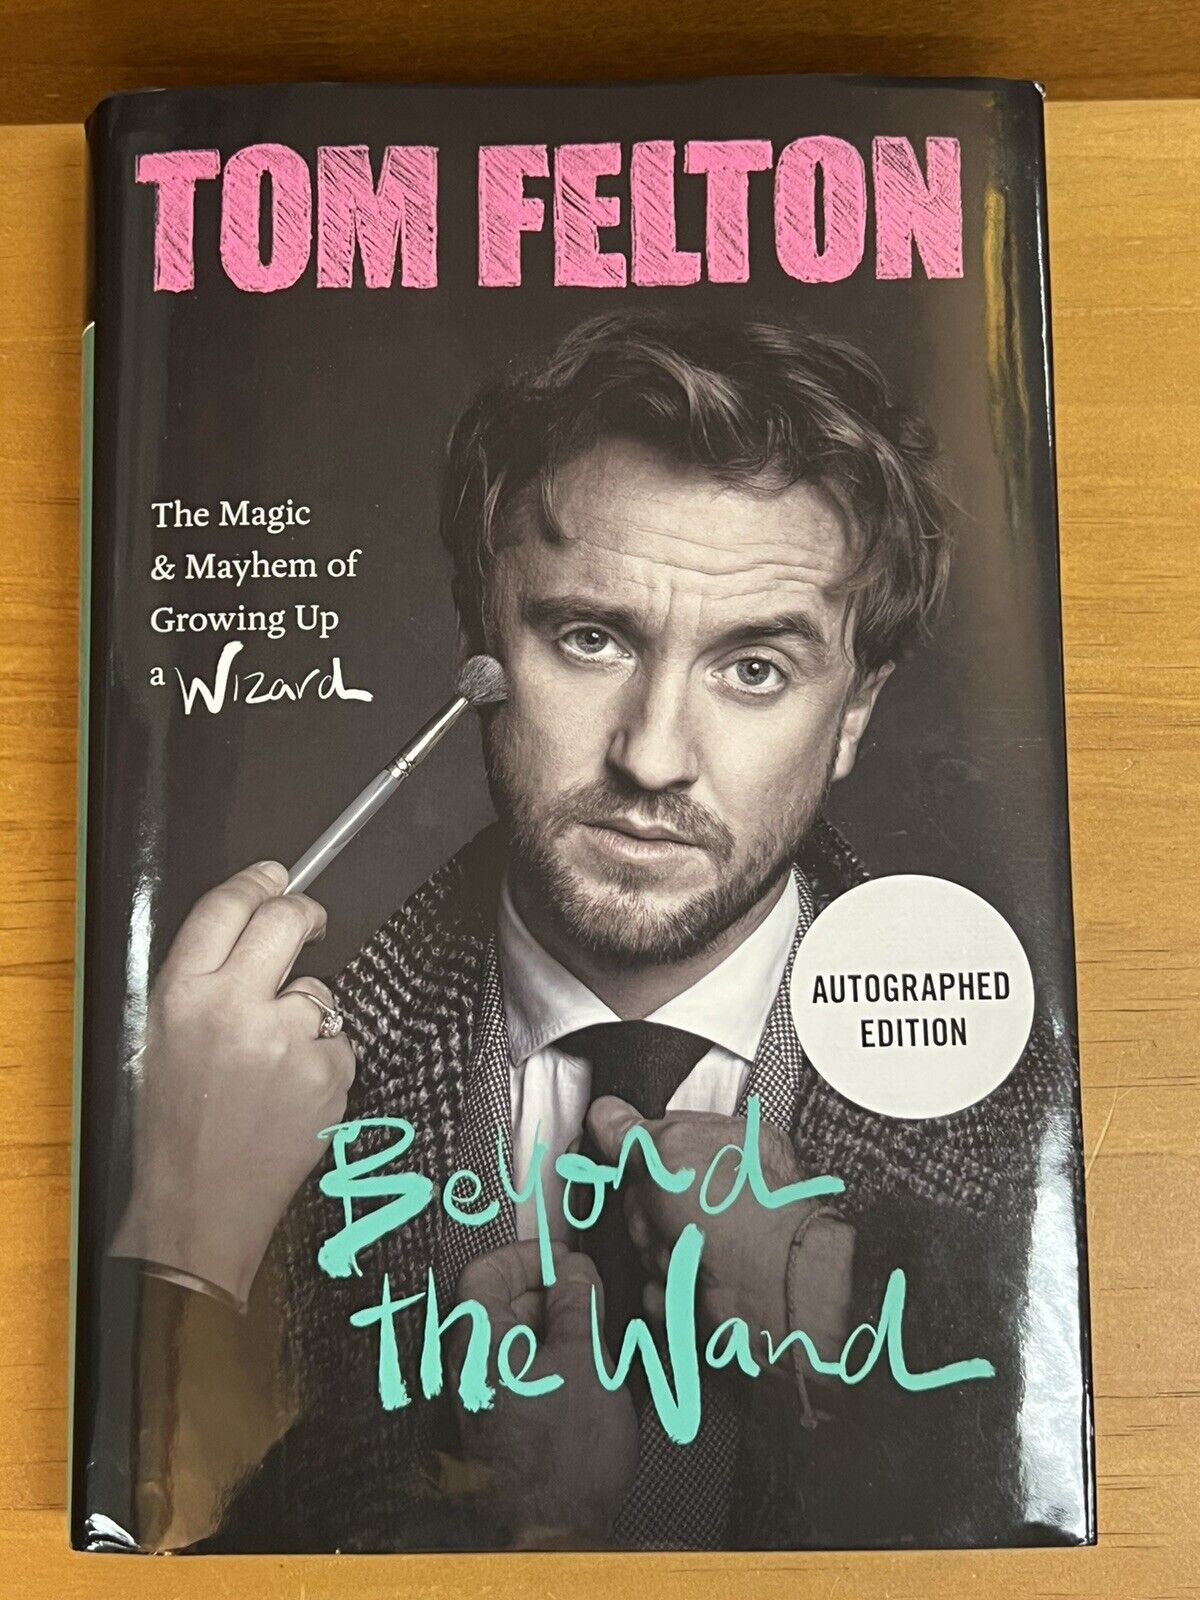 Tom Felton Beyond The Wand Autographed Edition Grand Central 2016 Book Signed